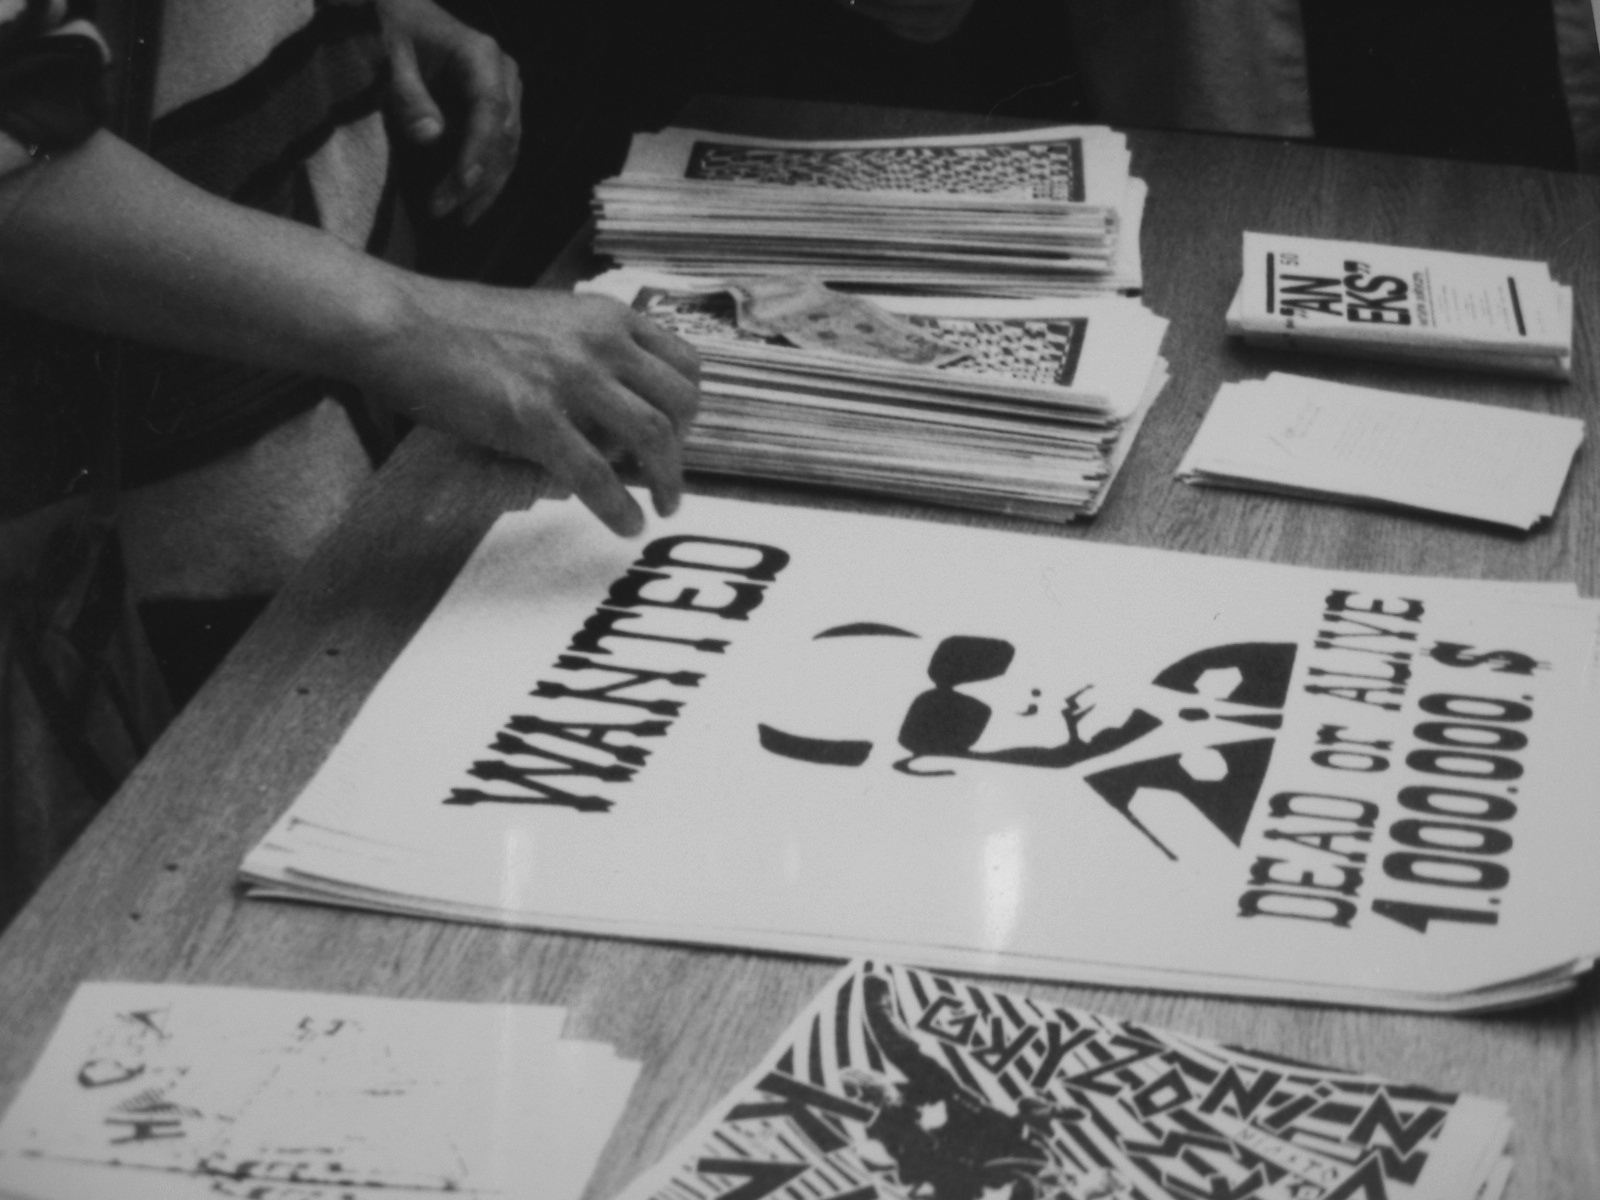 A scene from the happening 'The Day After' carried on Piotrkowska street in Łódź, June 06, 1989. Posters 'Wanted' by Krzysztof Raczyński are placed on the table for sale during the event.